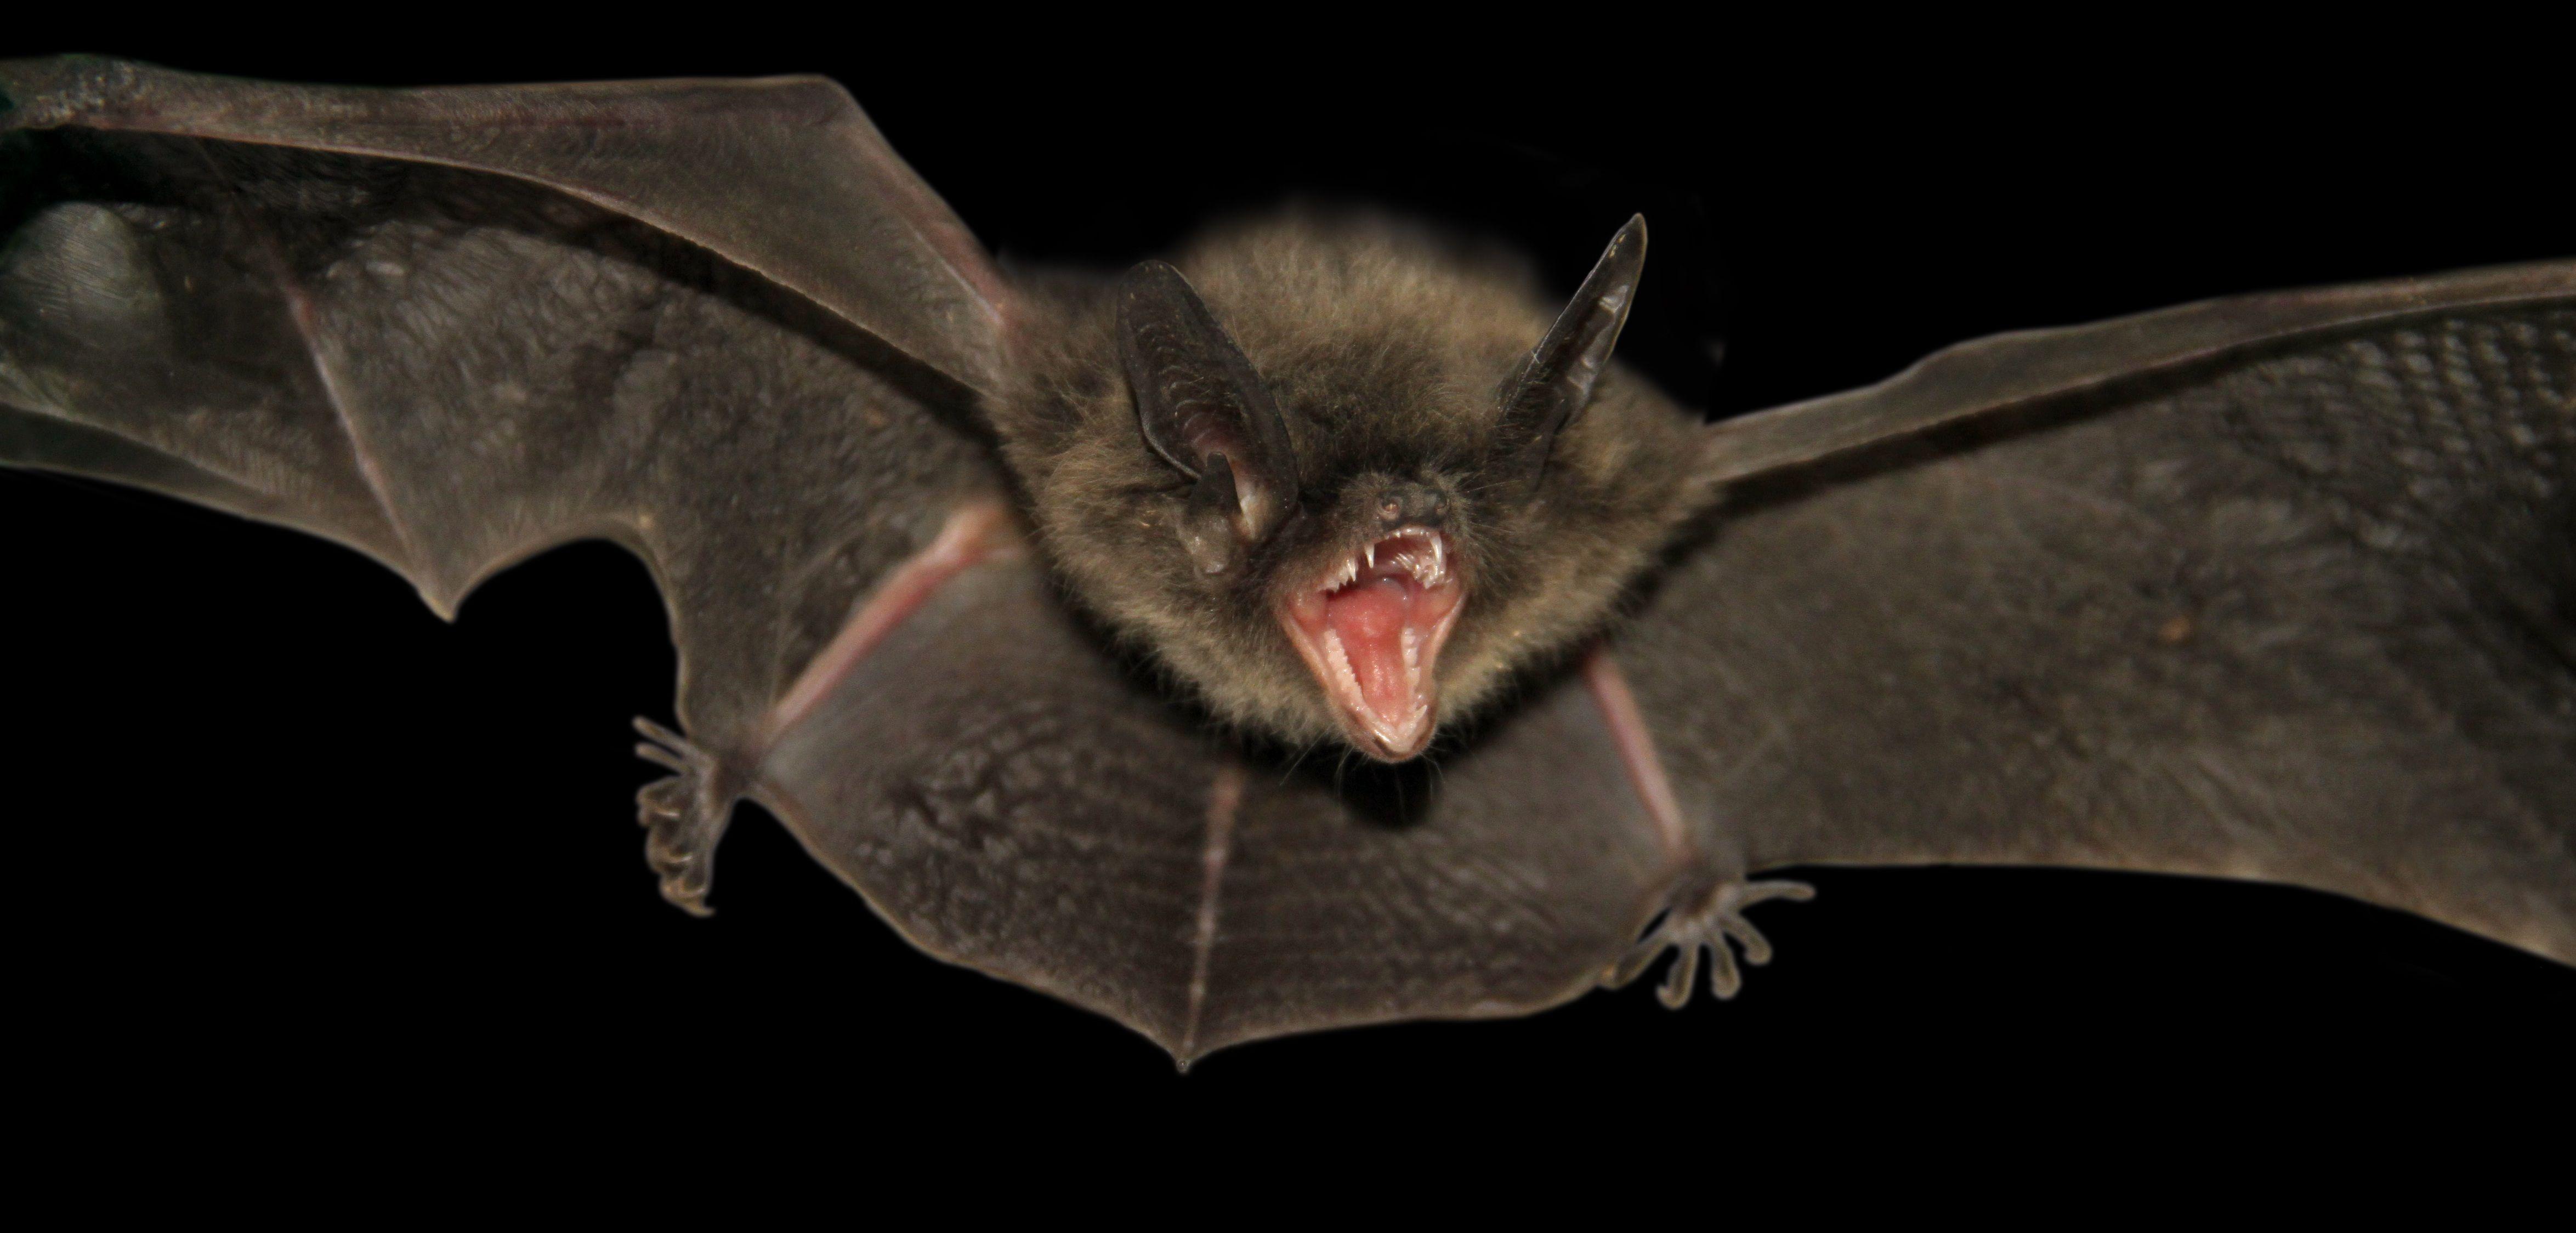 Long life and resistant to diseases? Our money's on bats to survive